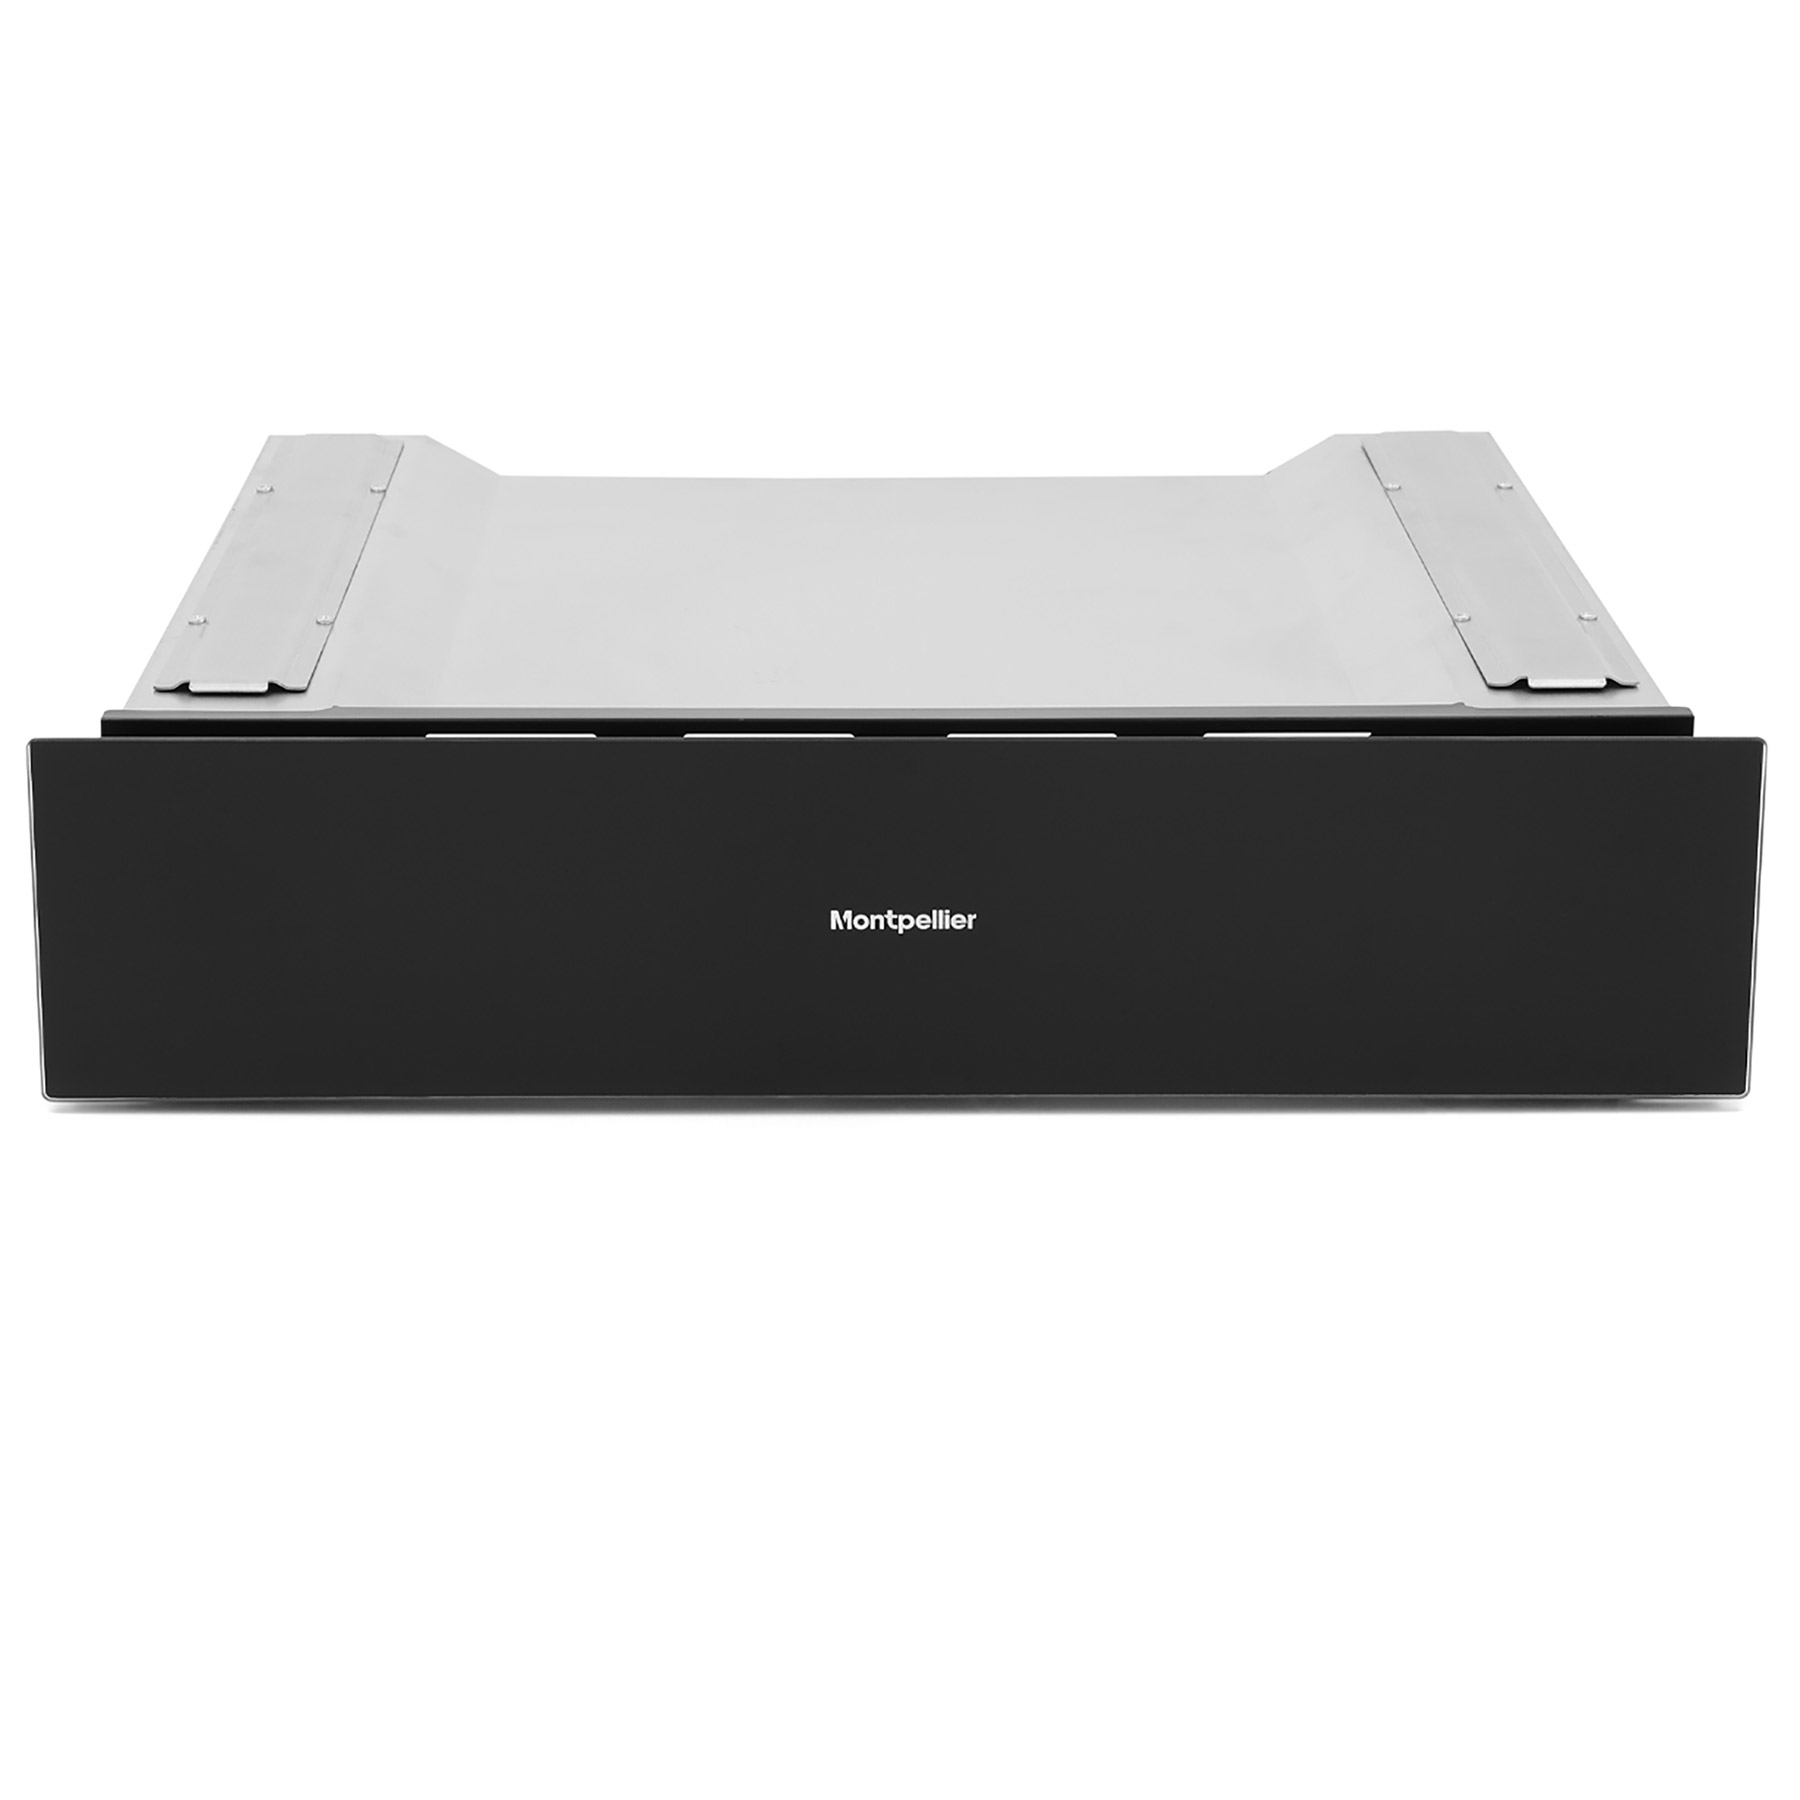 Image of Montpellier WD140BG 14cm Built In Warming Drawer in Black Glass